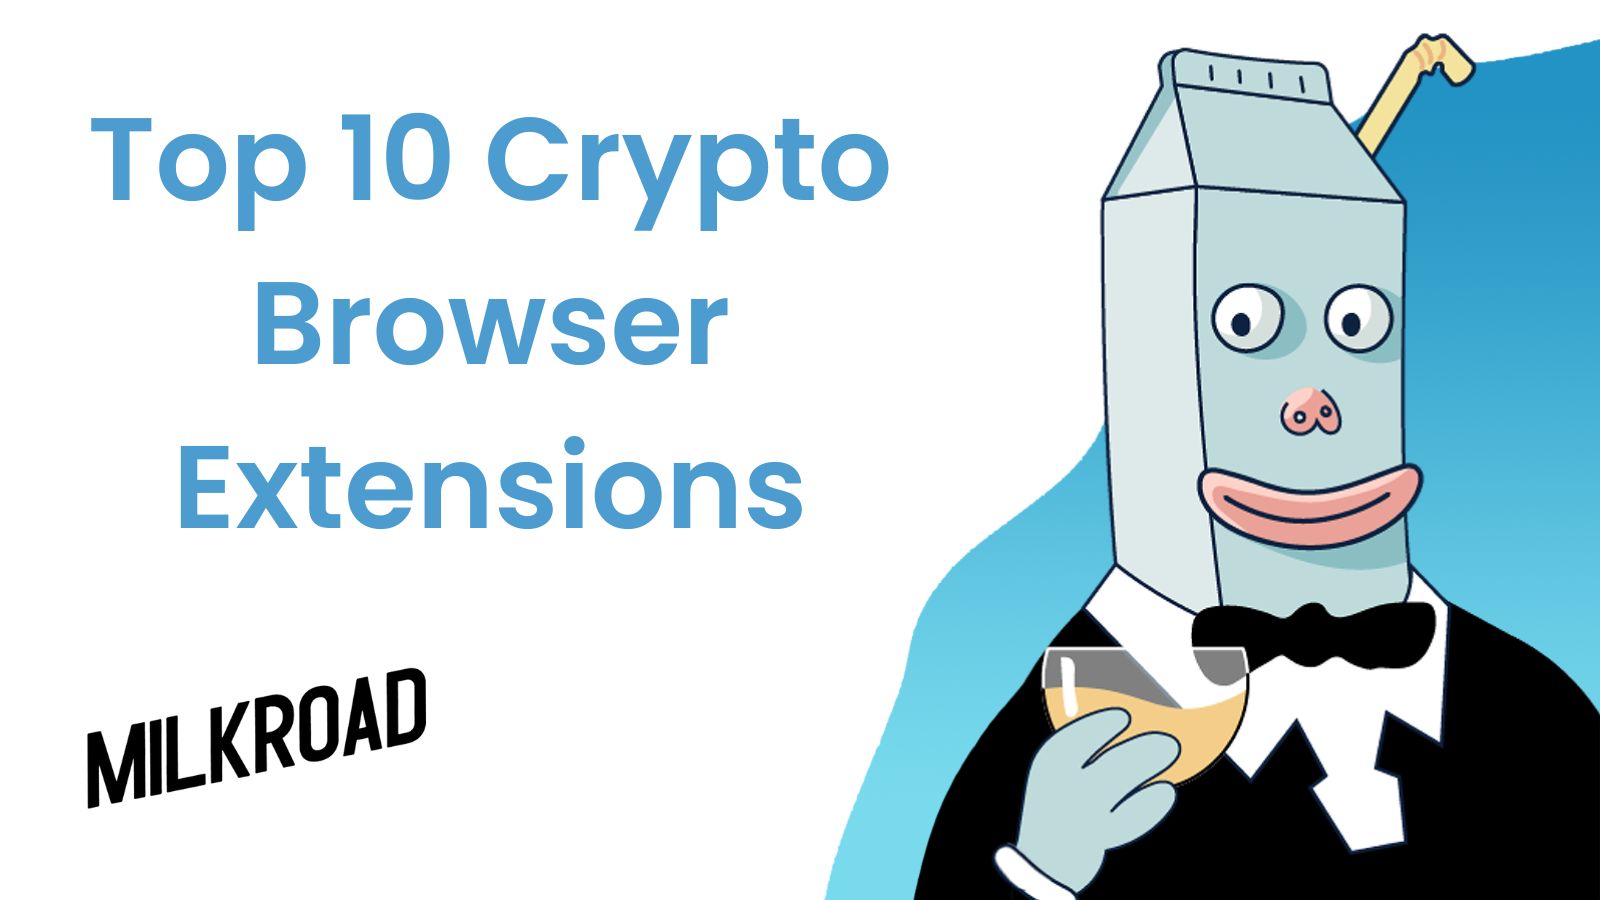 Top 10 Crypto Browser Extensions